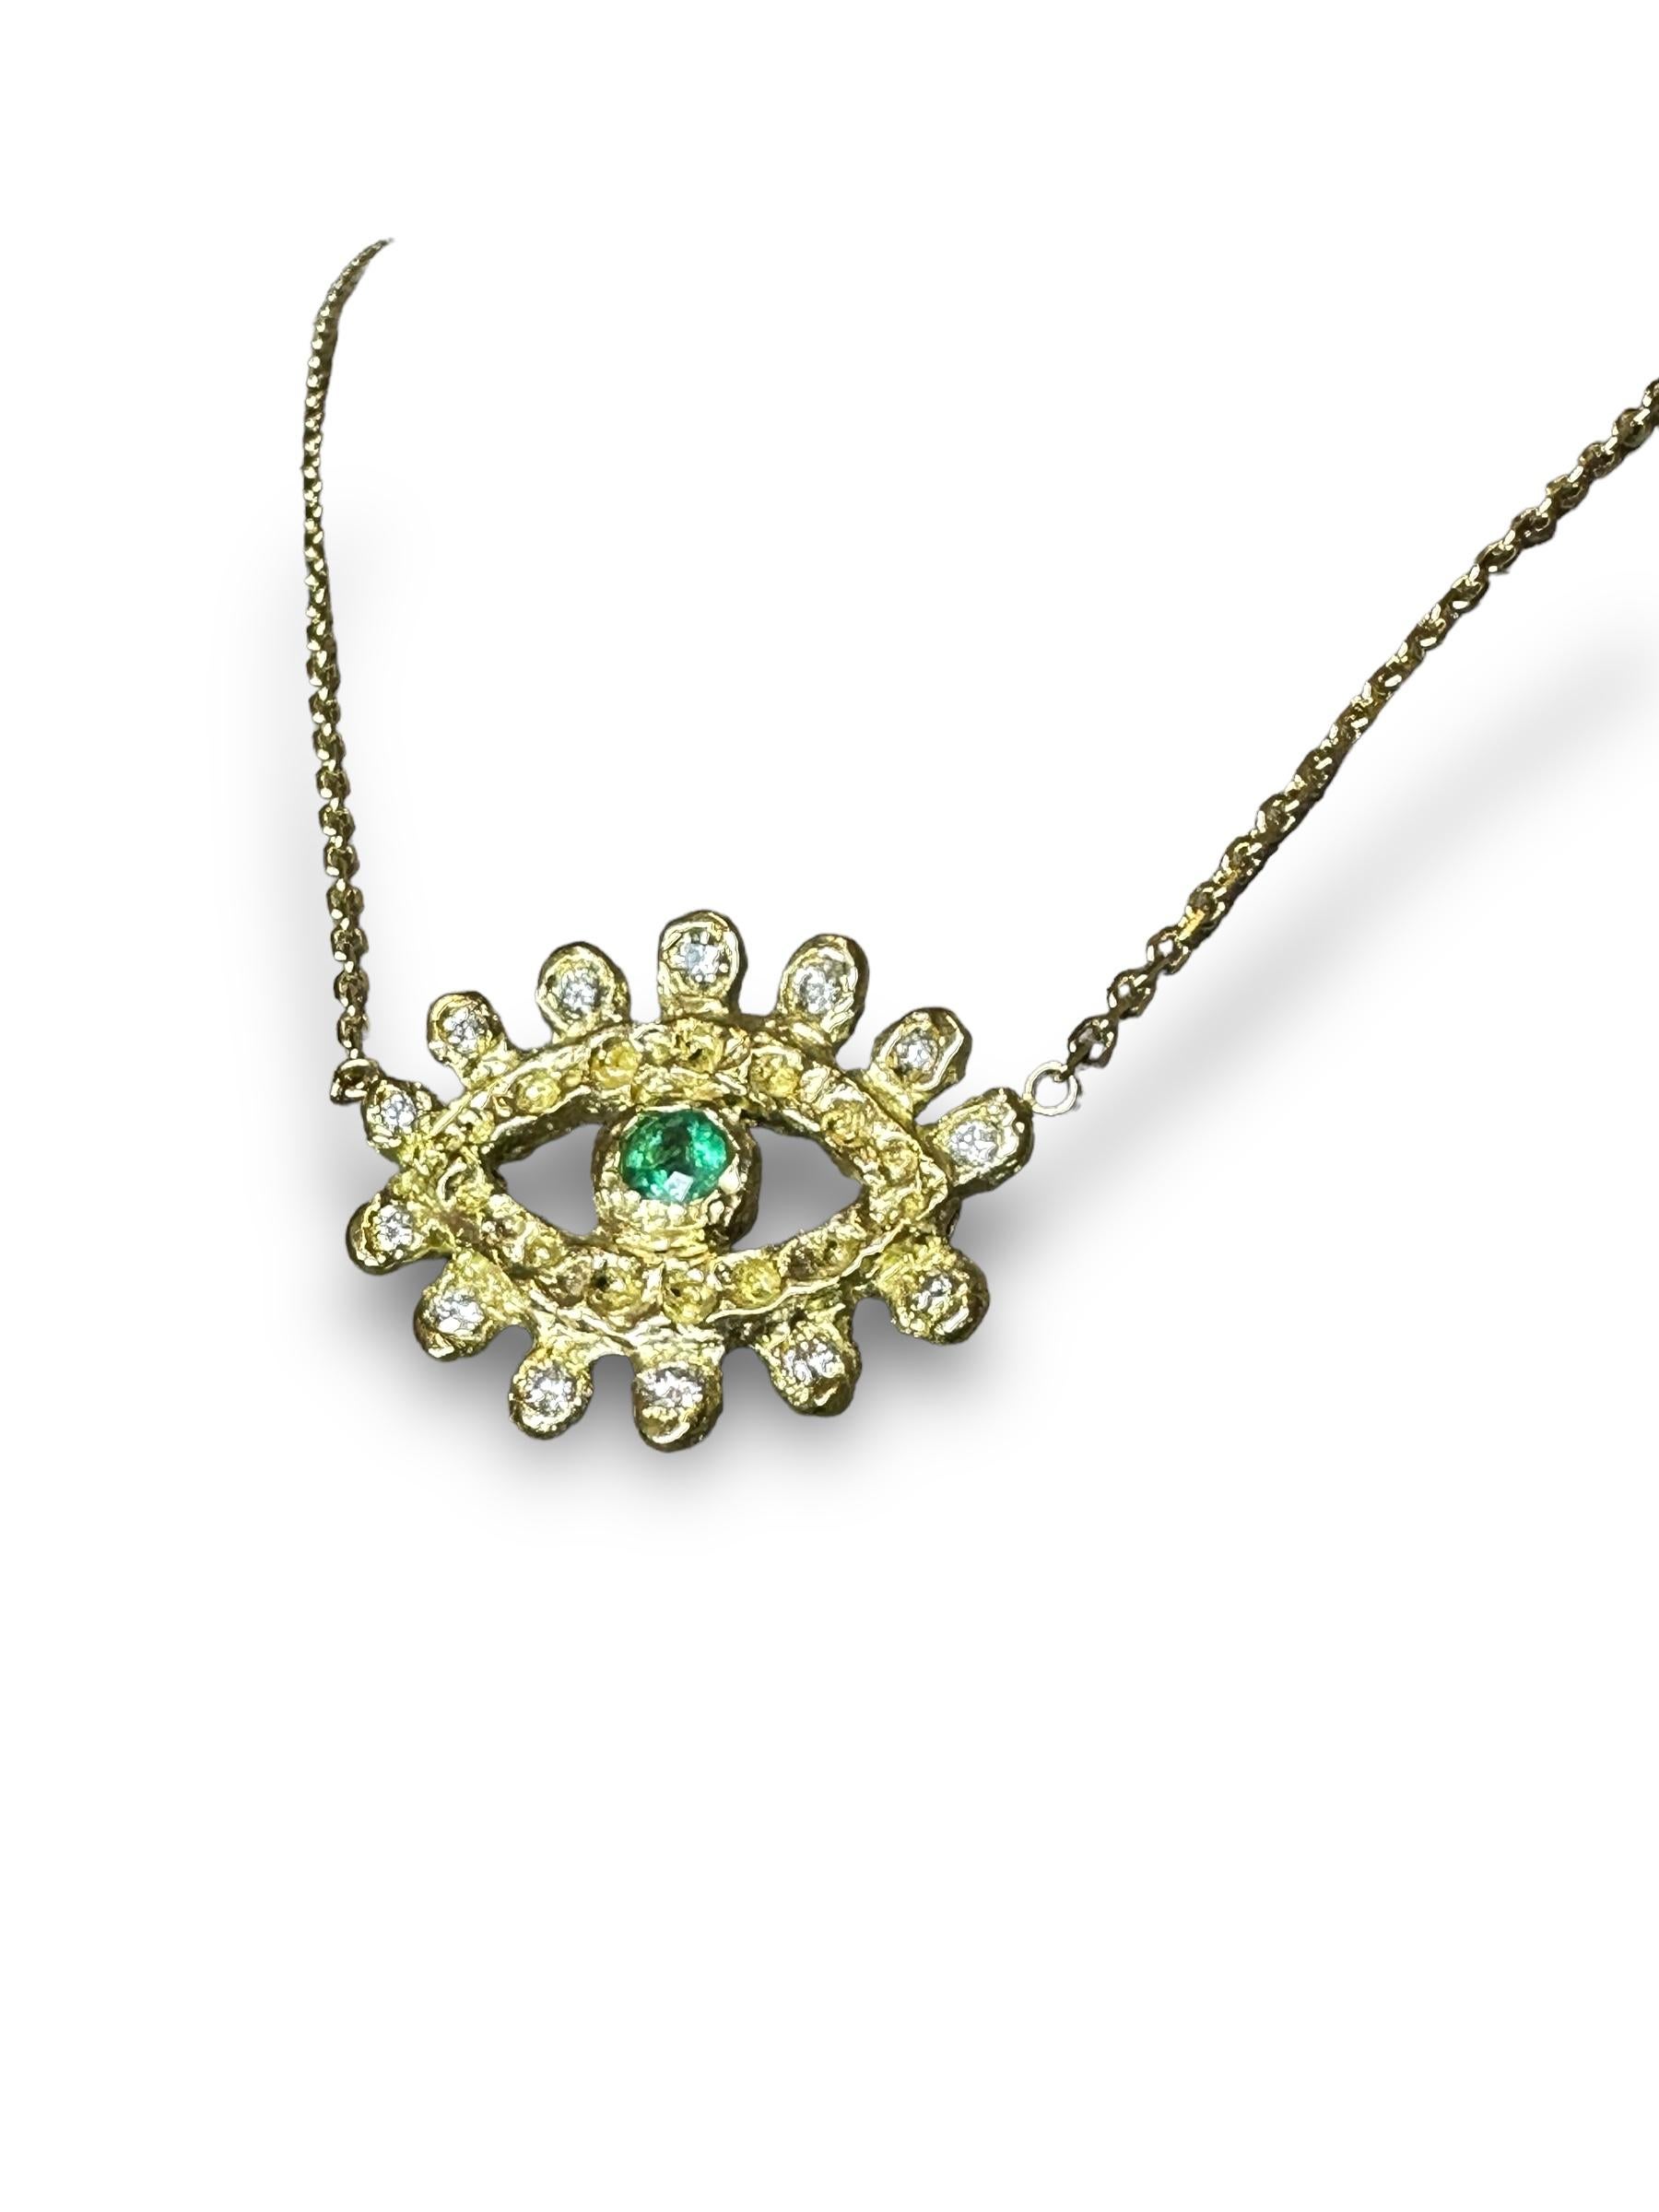 Brilliant Cut Emerald Evil Eye Necklace with Diamonds in Gold in stock For Sale